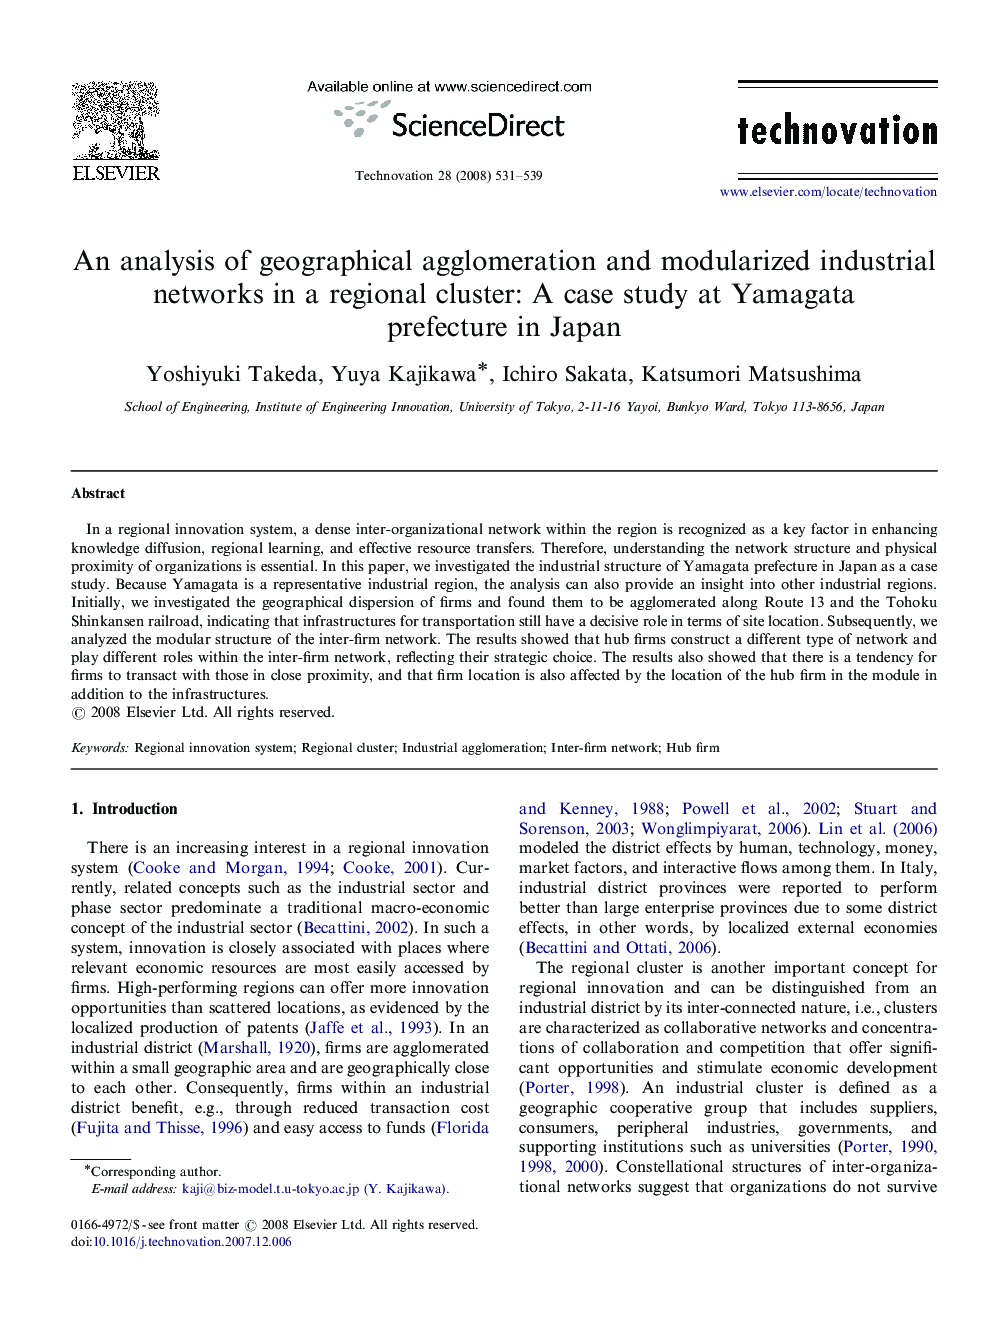 An analysis of geographical agglomeration and modularized industrial networks in a regional cluster: A case study at Yamagata prefecture in Japan